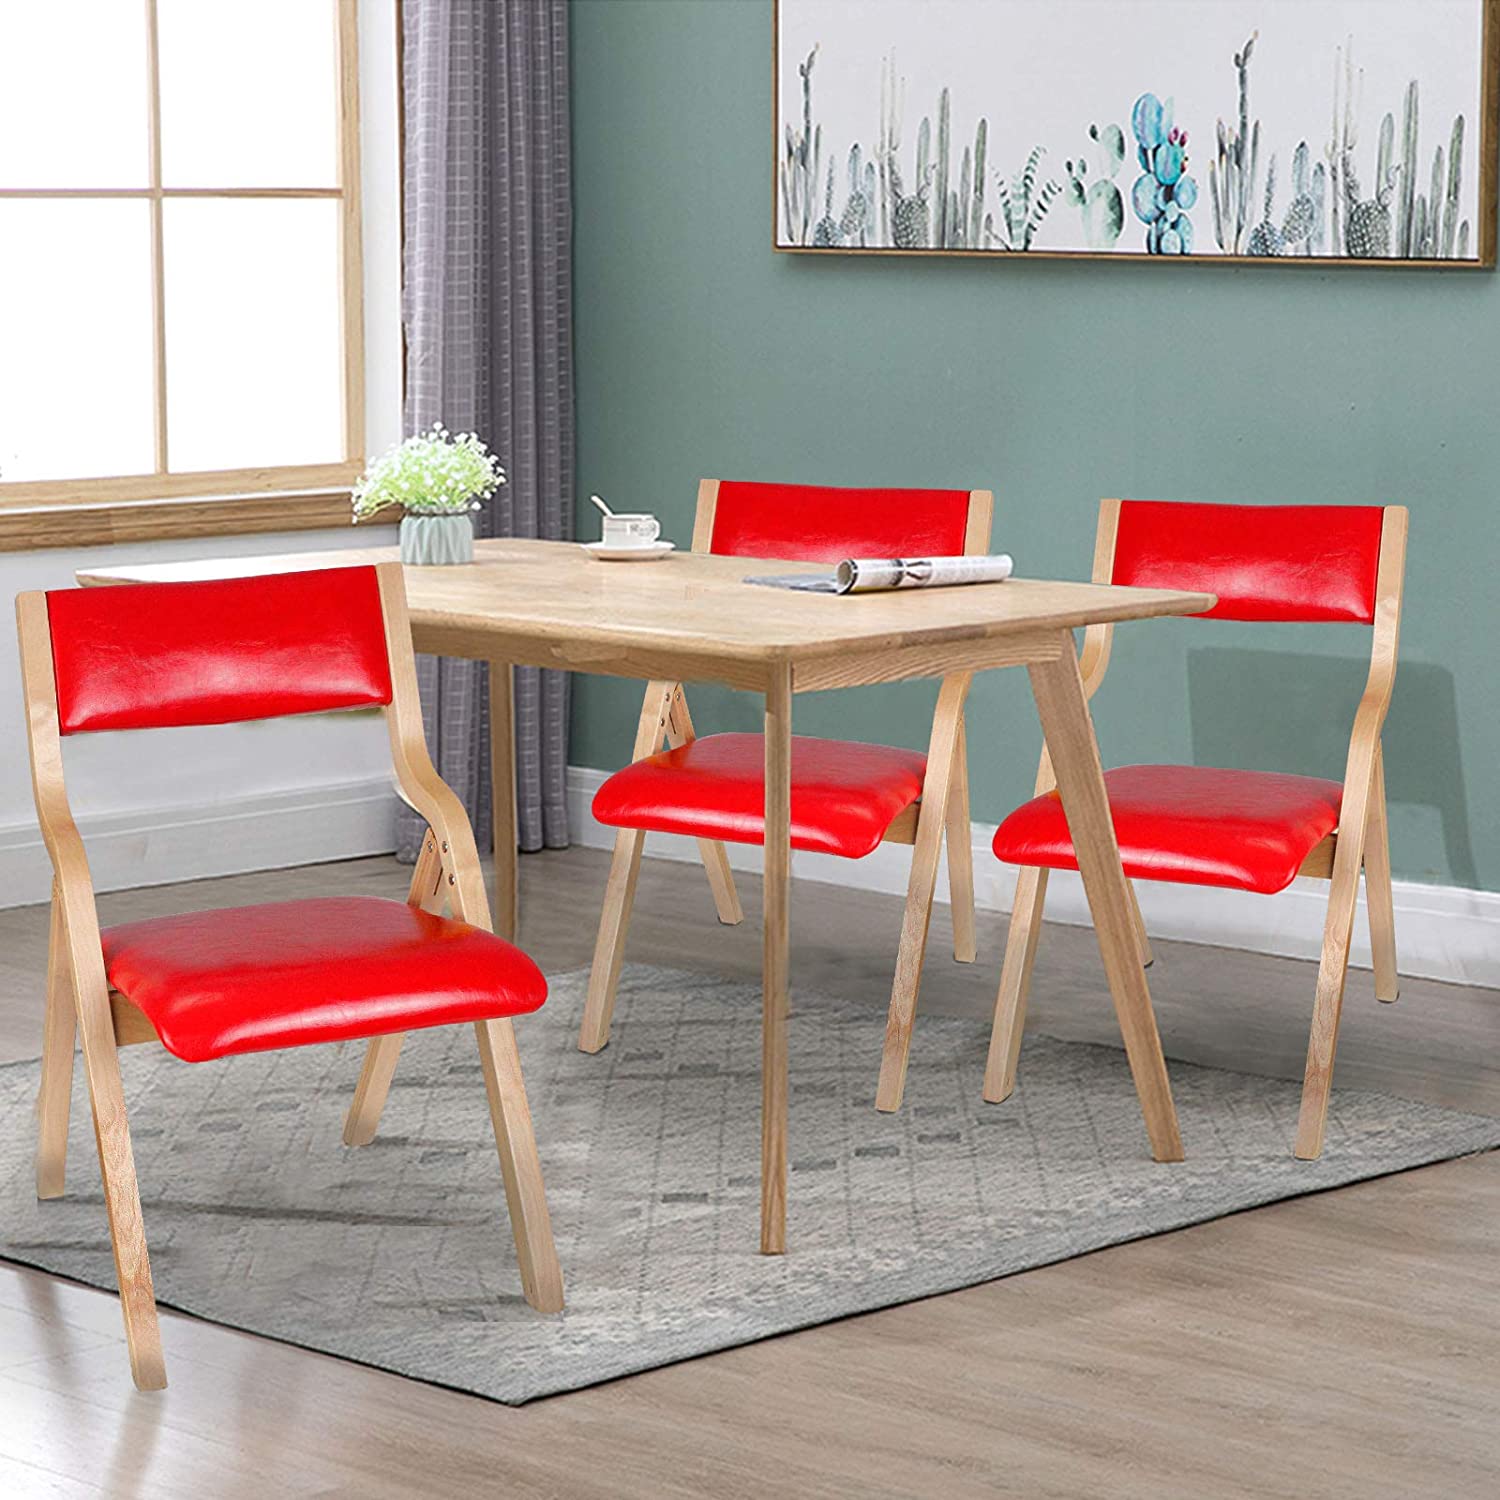 Natural Beechwood Solid Wood Folding Chair Armless with Vinyl Padded Seat Back for Home Dining Desk 4Set Red - image 5 of 8